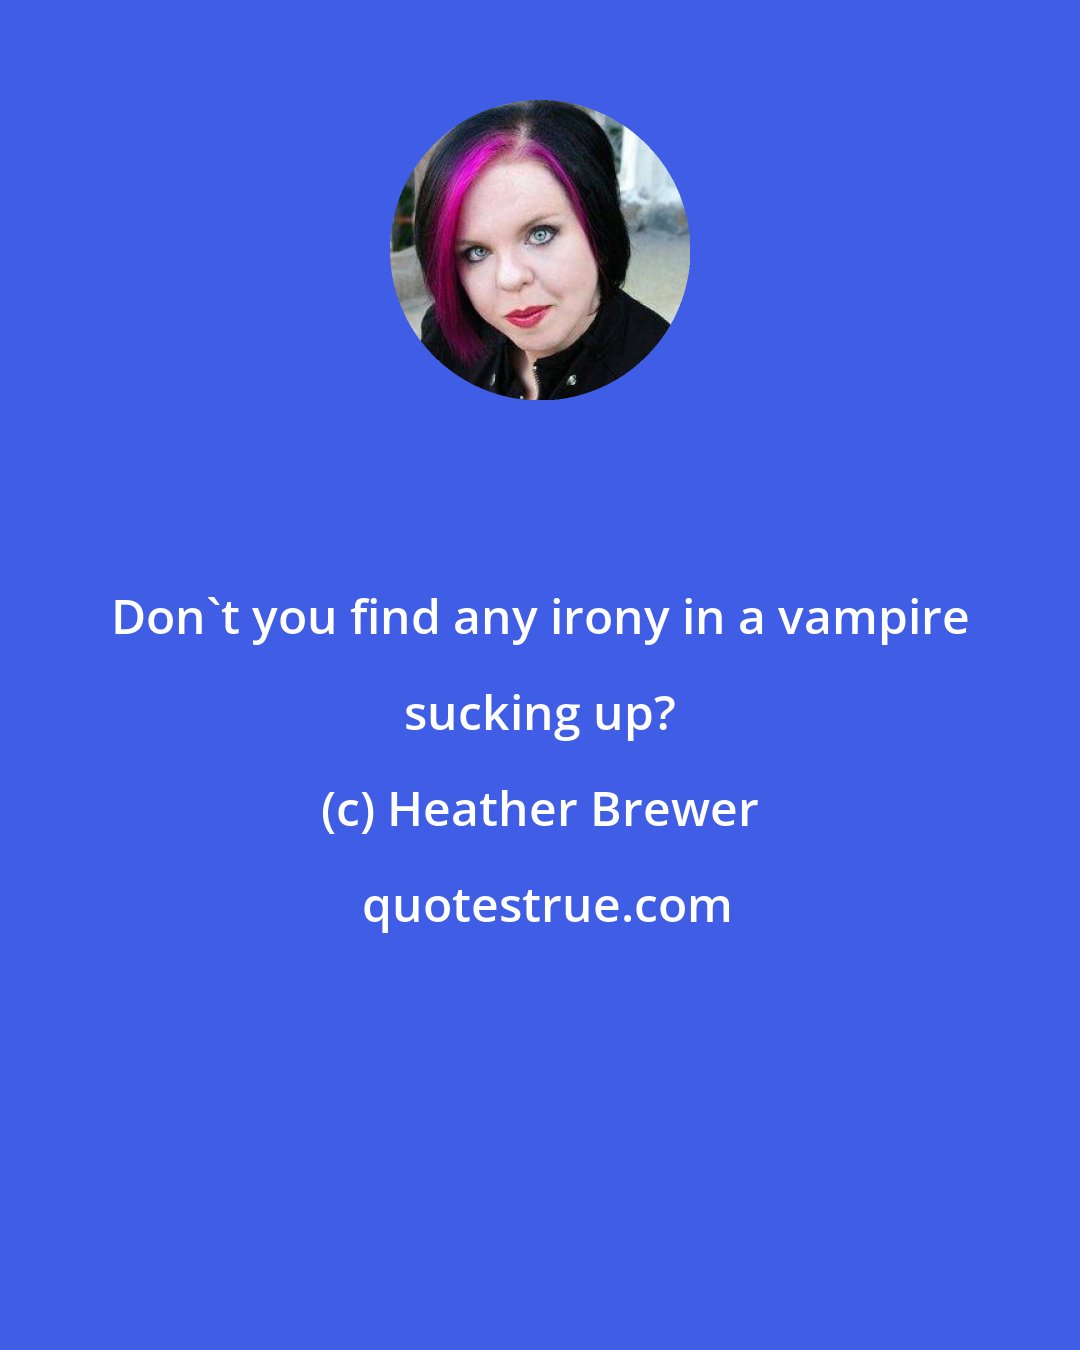 Heather Brewer: Don't you find any irony in a vampire sucking up?